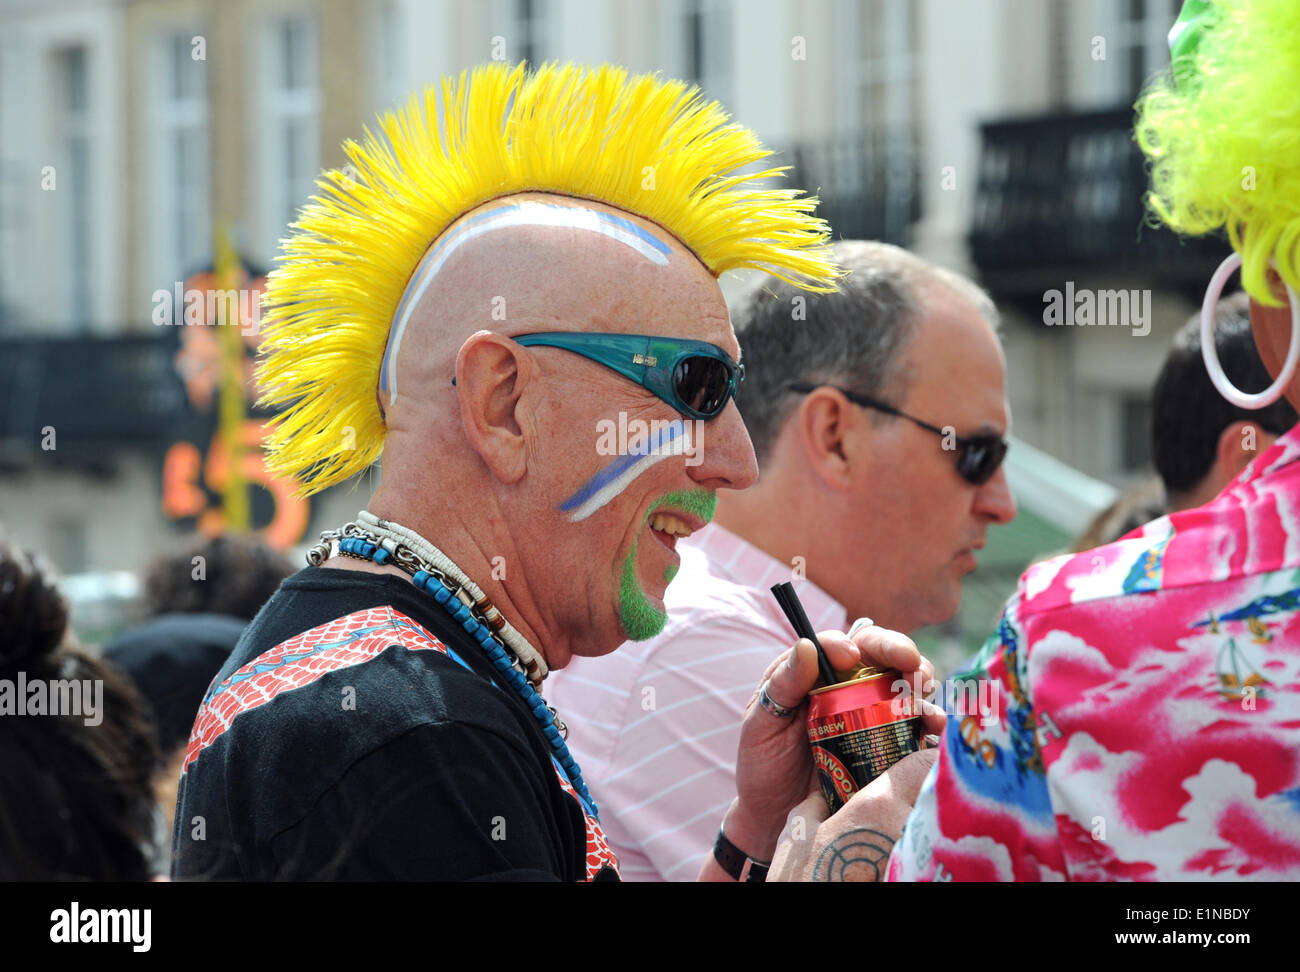 Brighton Sussex UK 7 June - Thousands of people enjoy the good weather the music and the food at Kemp Town Carnival in Brighton today The Kemp Town Carnival is one of Brighton’s largest free community street festivals, set in the heart of Kemp Town Village Credit:  Simon Dack/Alamy Live News Stock Photo